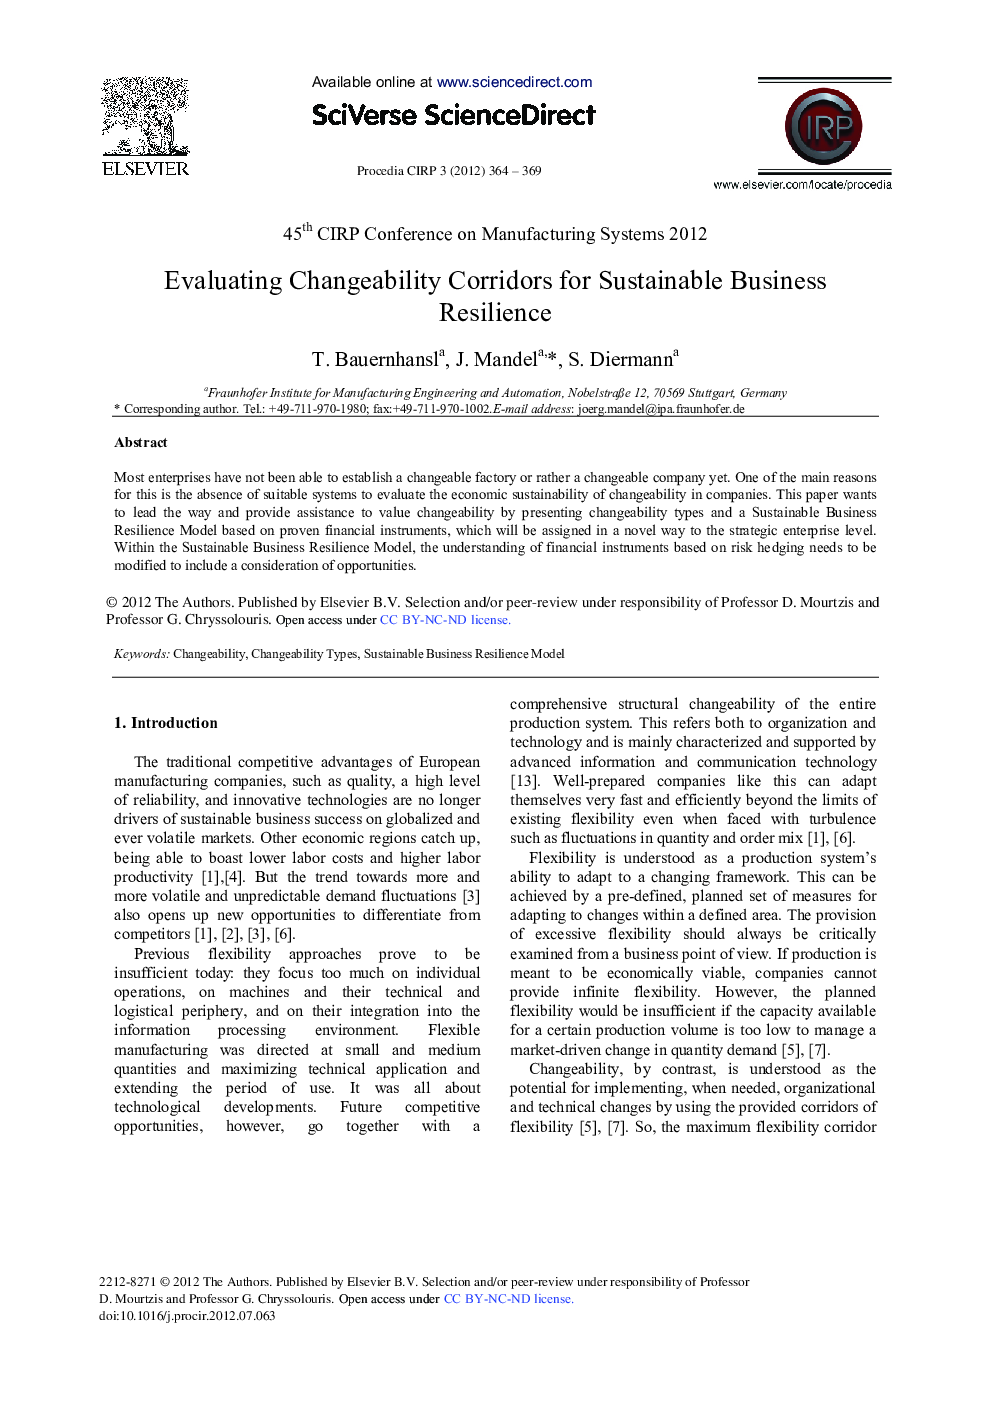 Evaluating Changeability Corridors for Sustainable Business Resilience